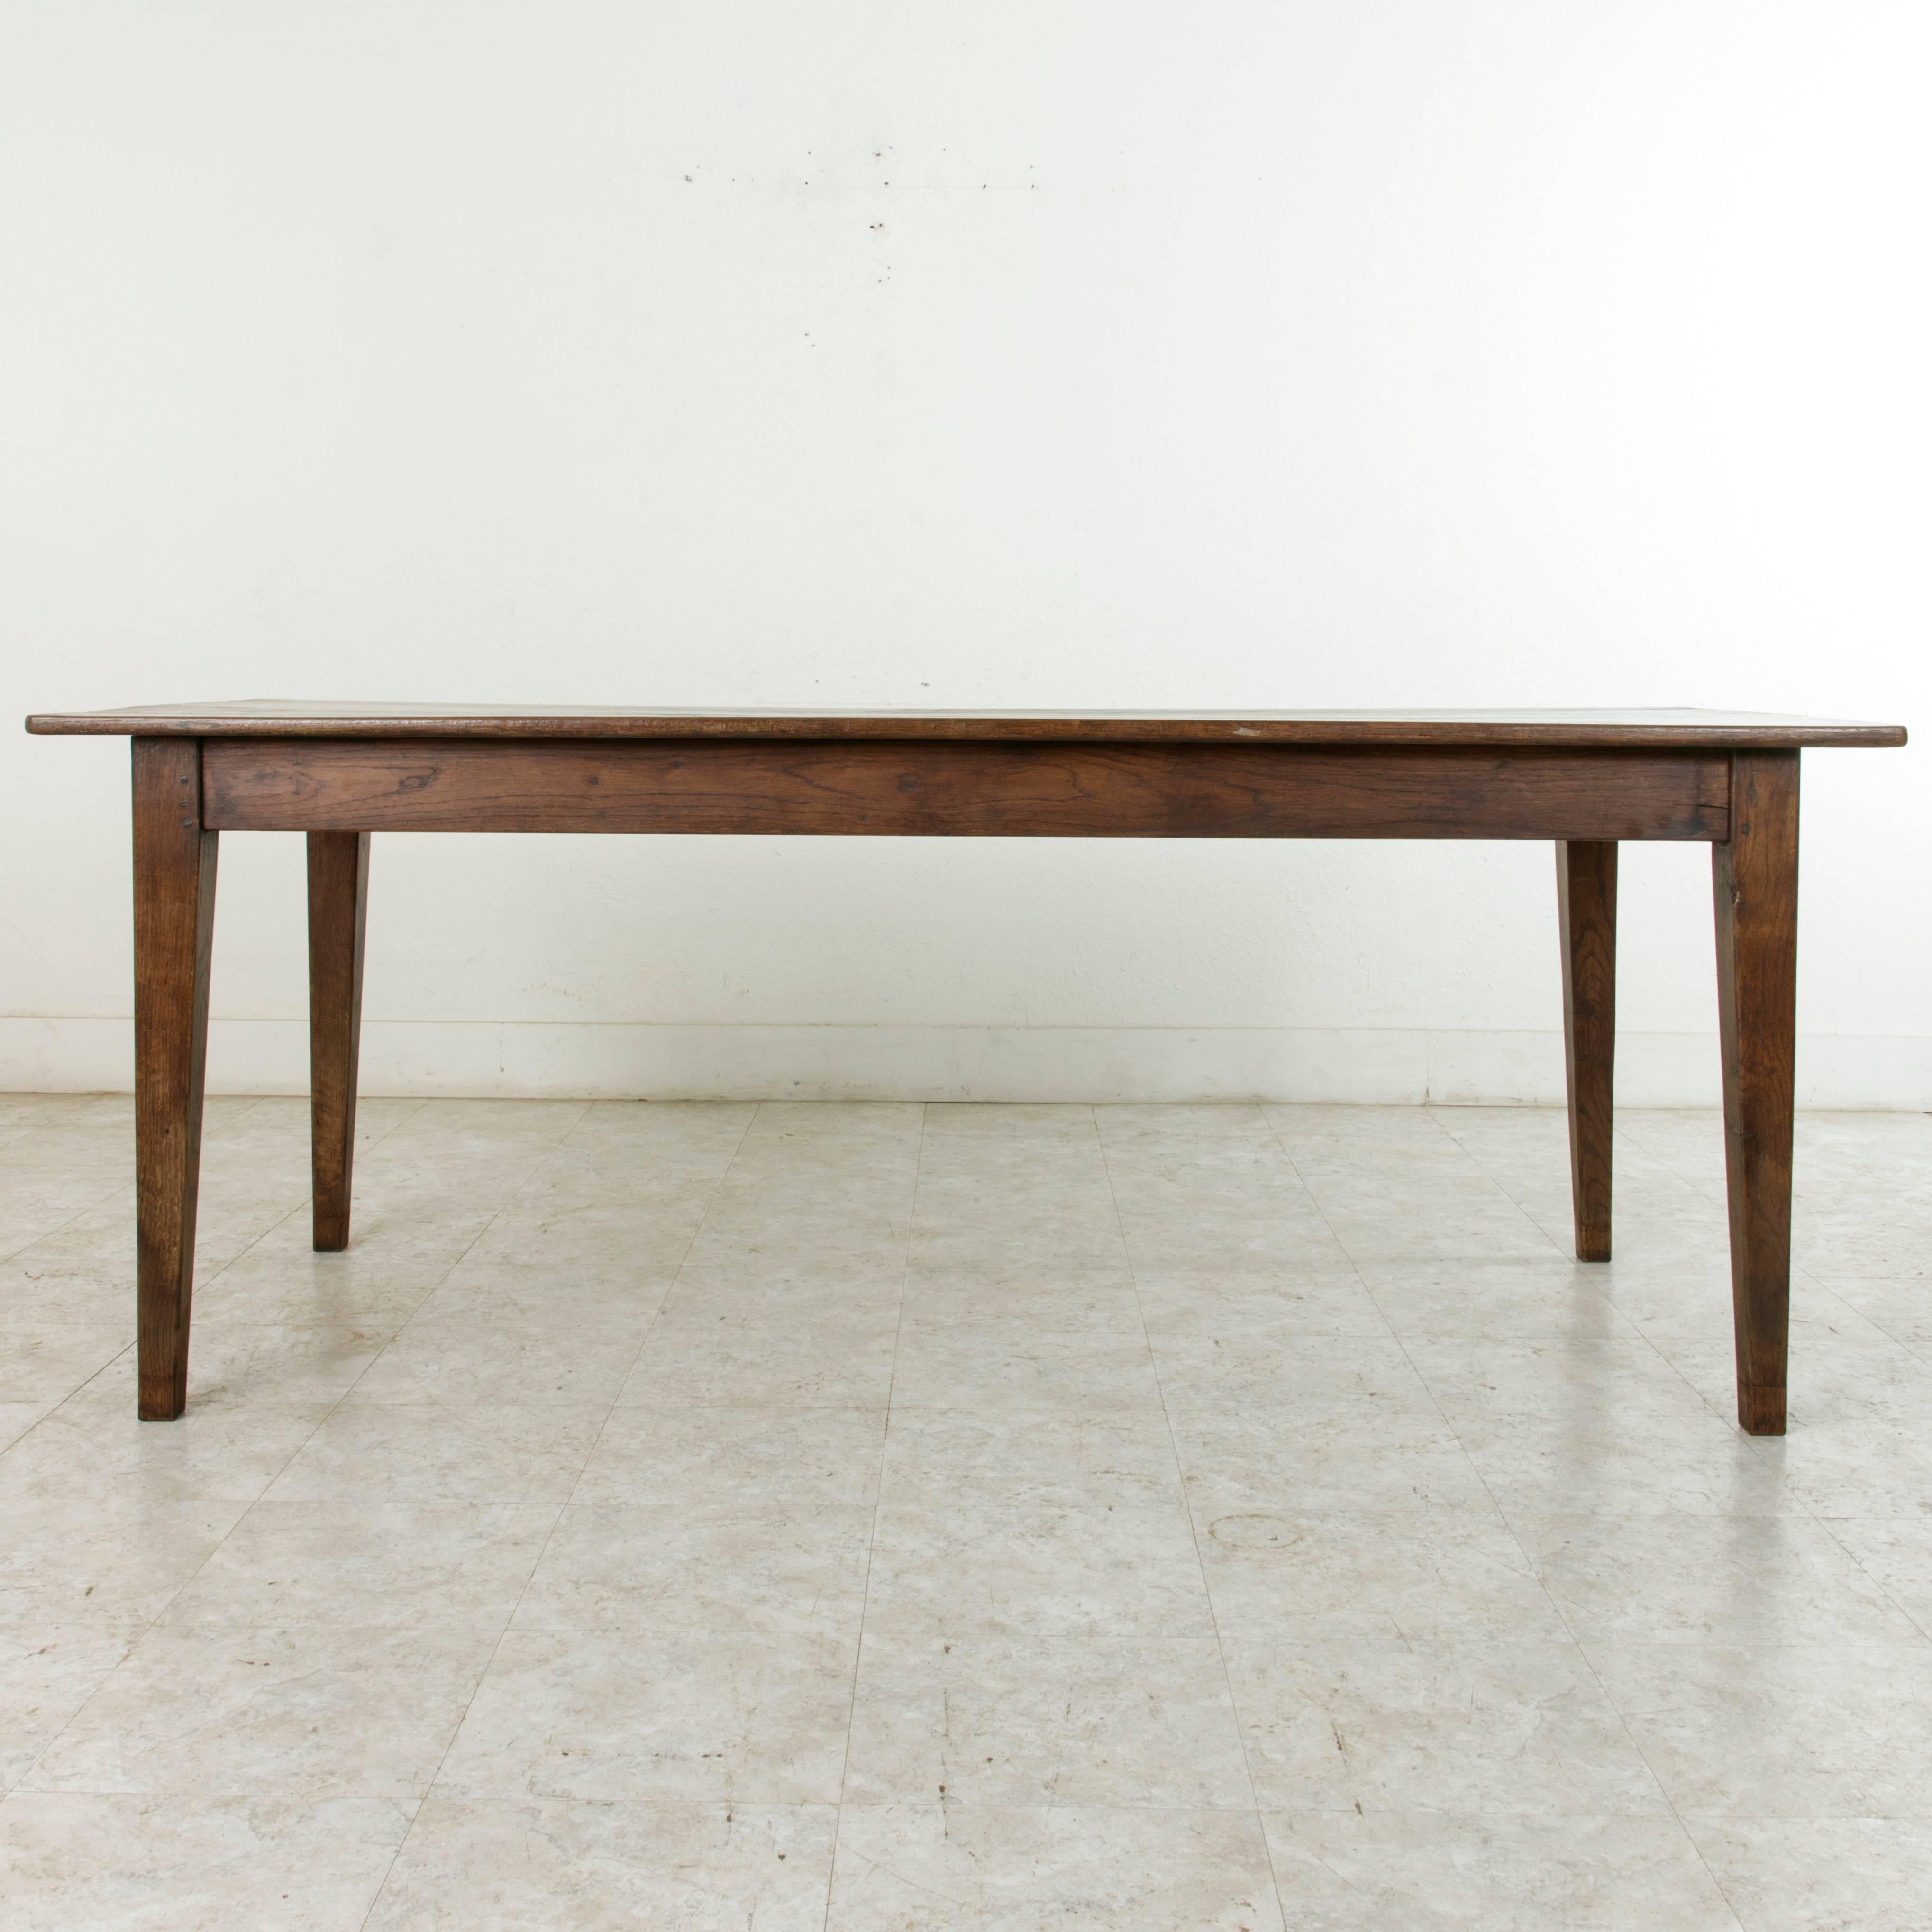 Early 20th Century French Oak Farm Table, Dining Table with Drawer from Normandy 1